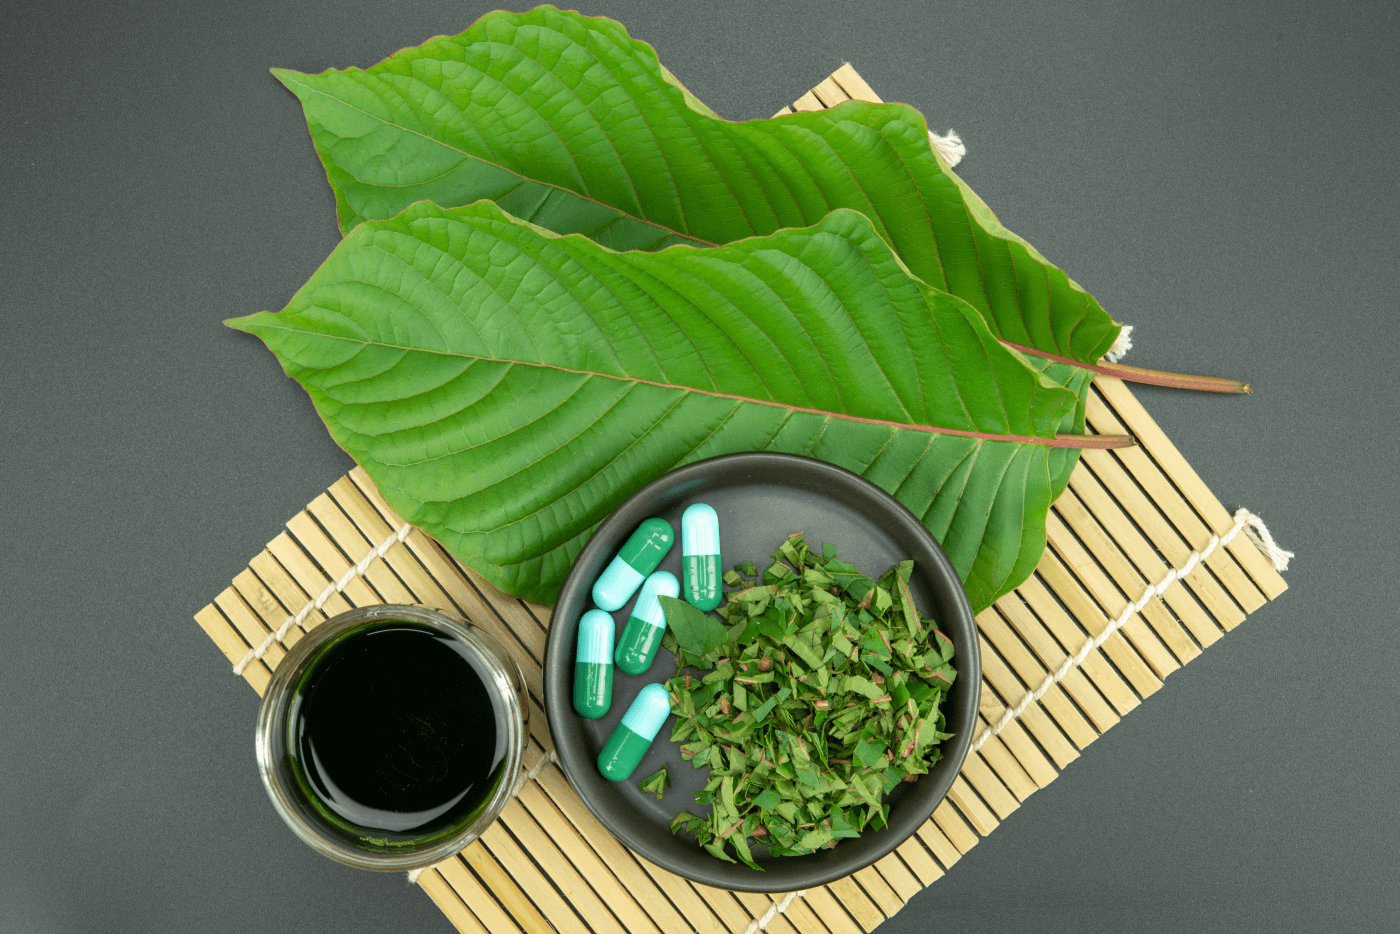 What Are The Best Ways To Take Kratom?